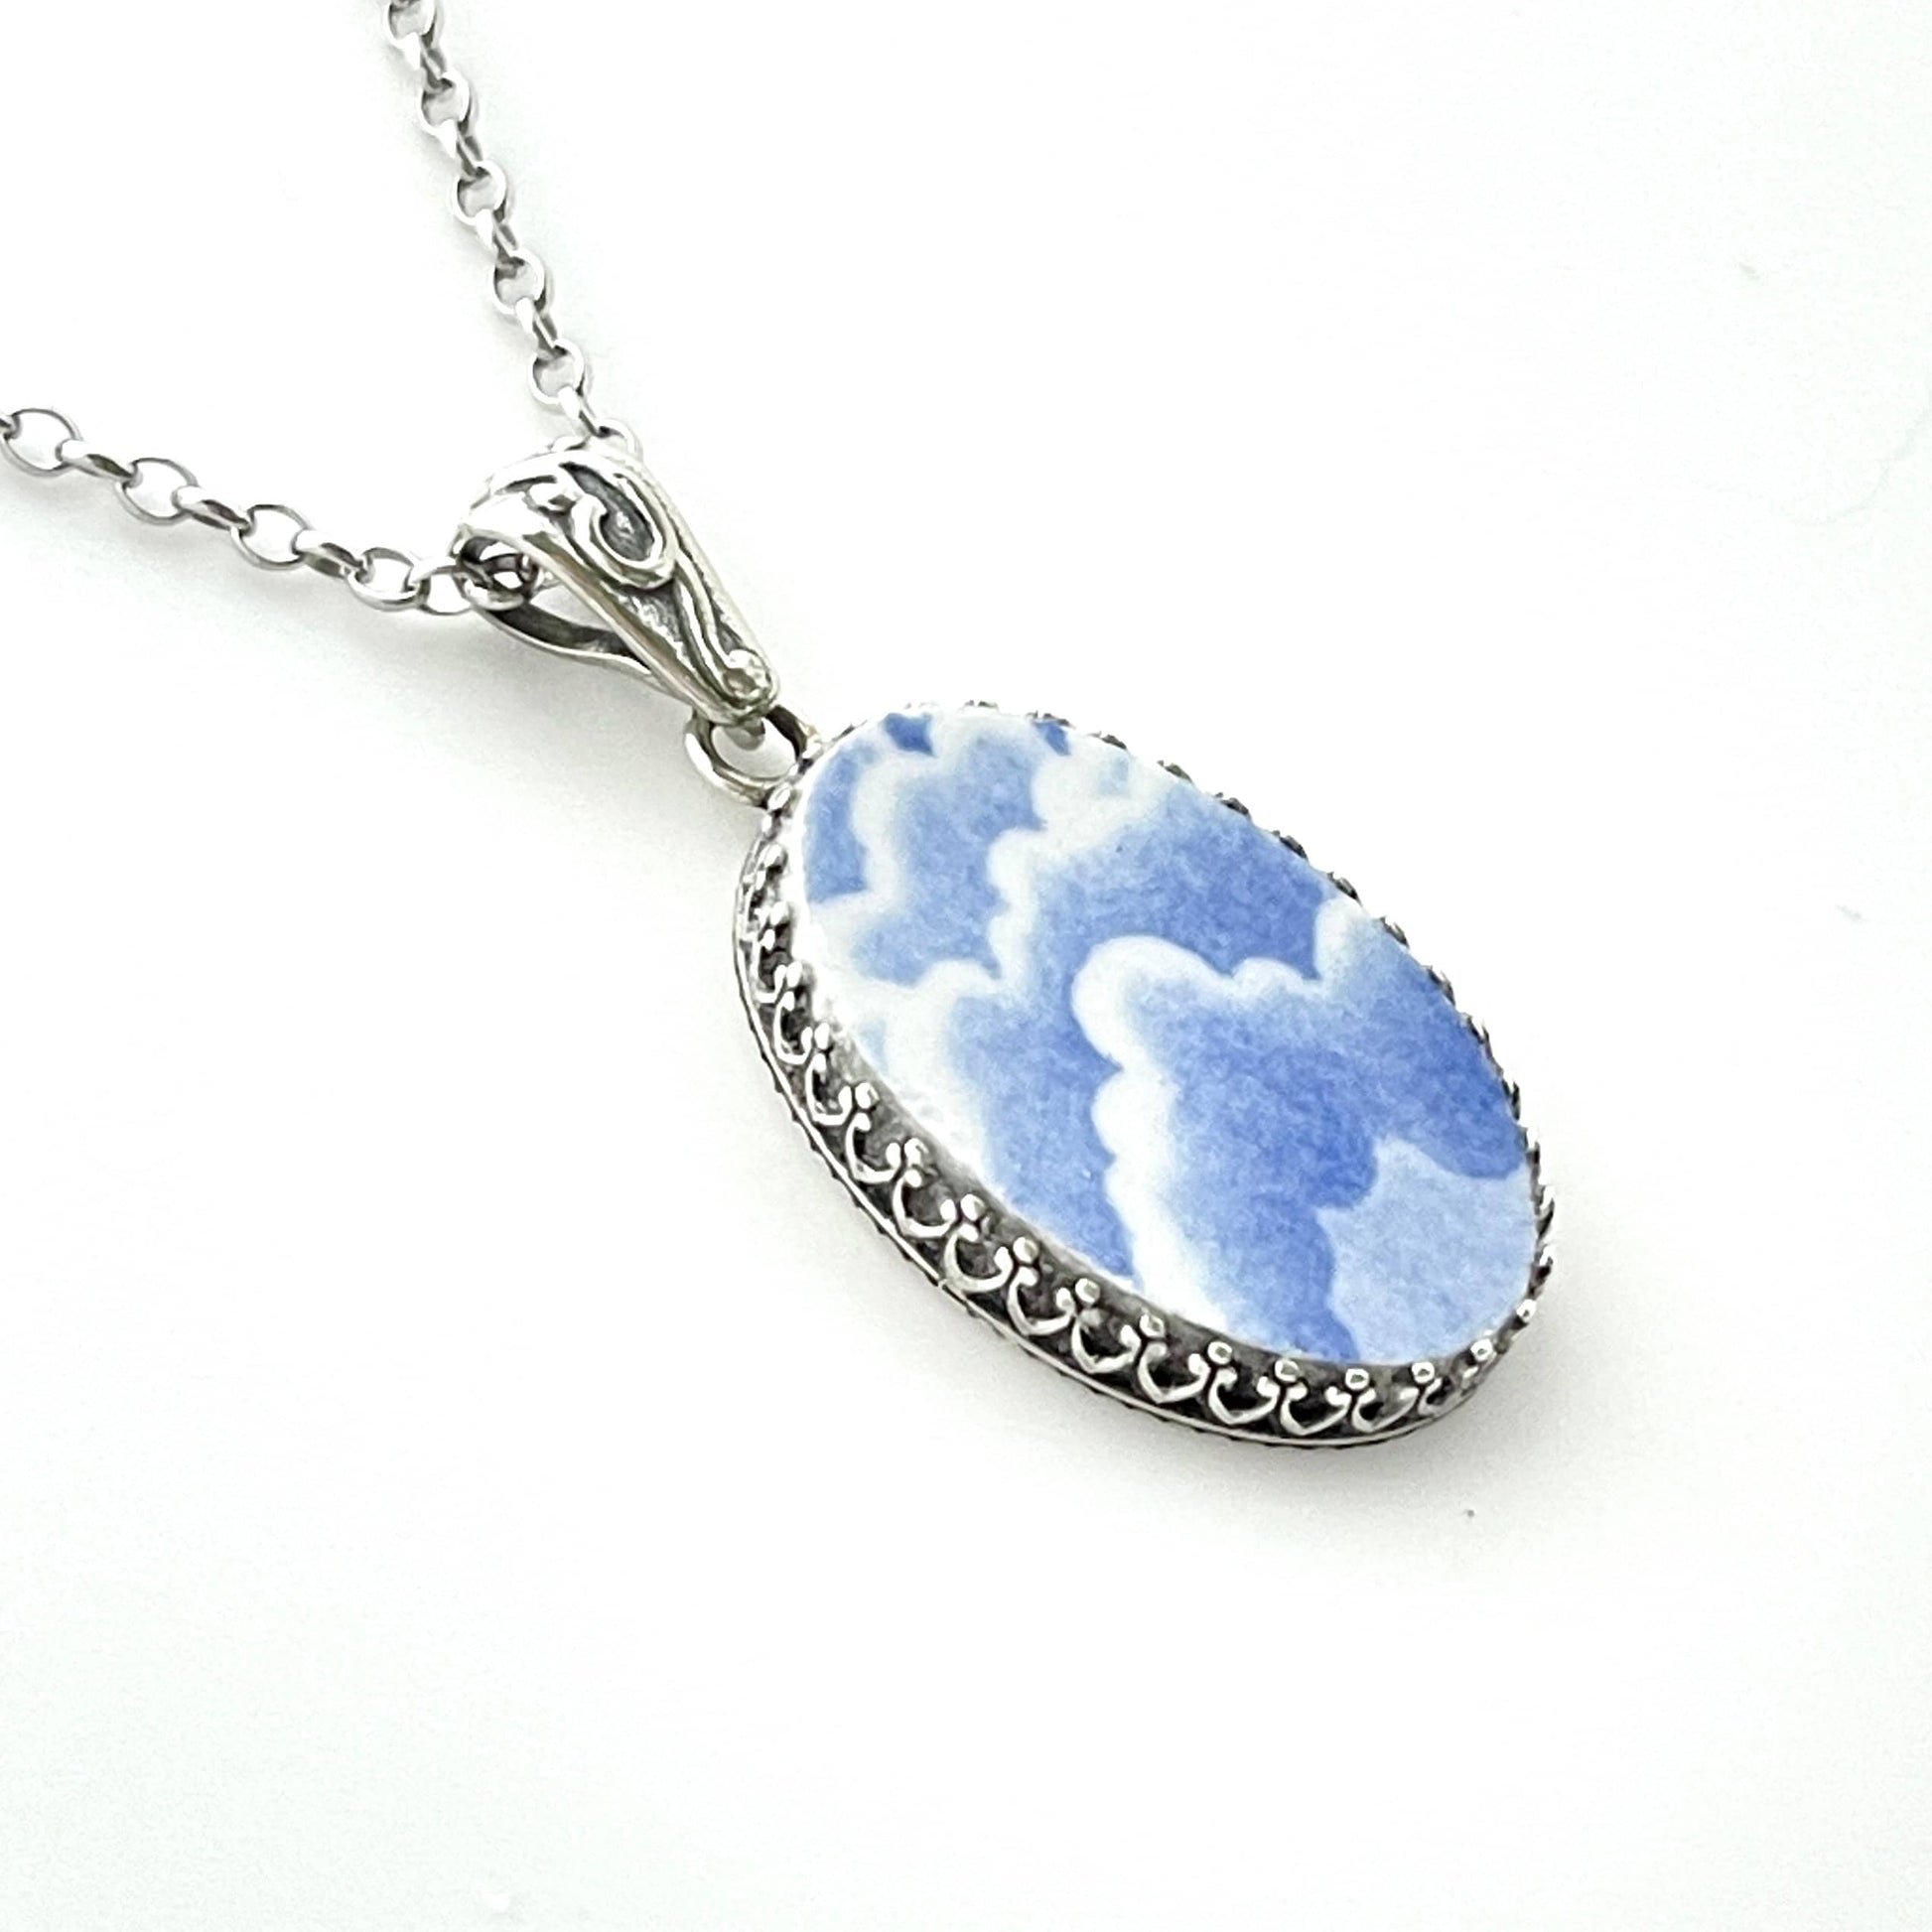 Blue and White Broken China Jewelry, Dream On Cloud Necklace, Unique 20th Anniversary Gift for Wife, Vintage China